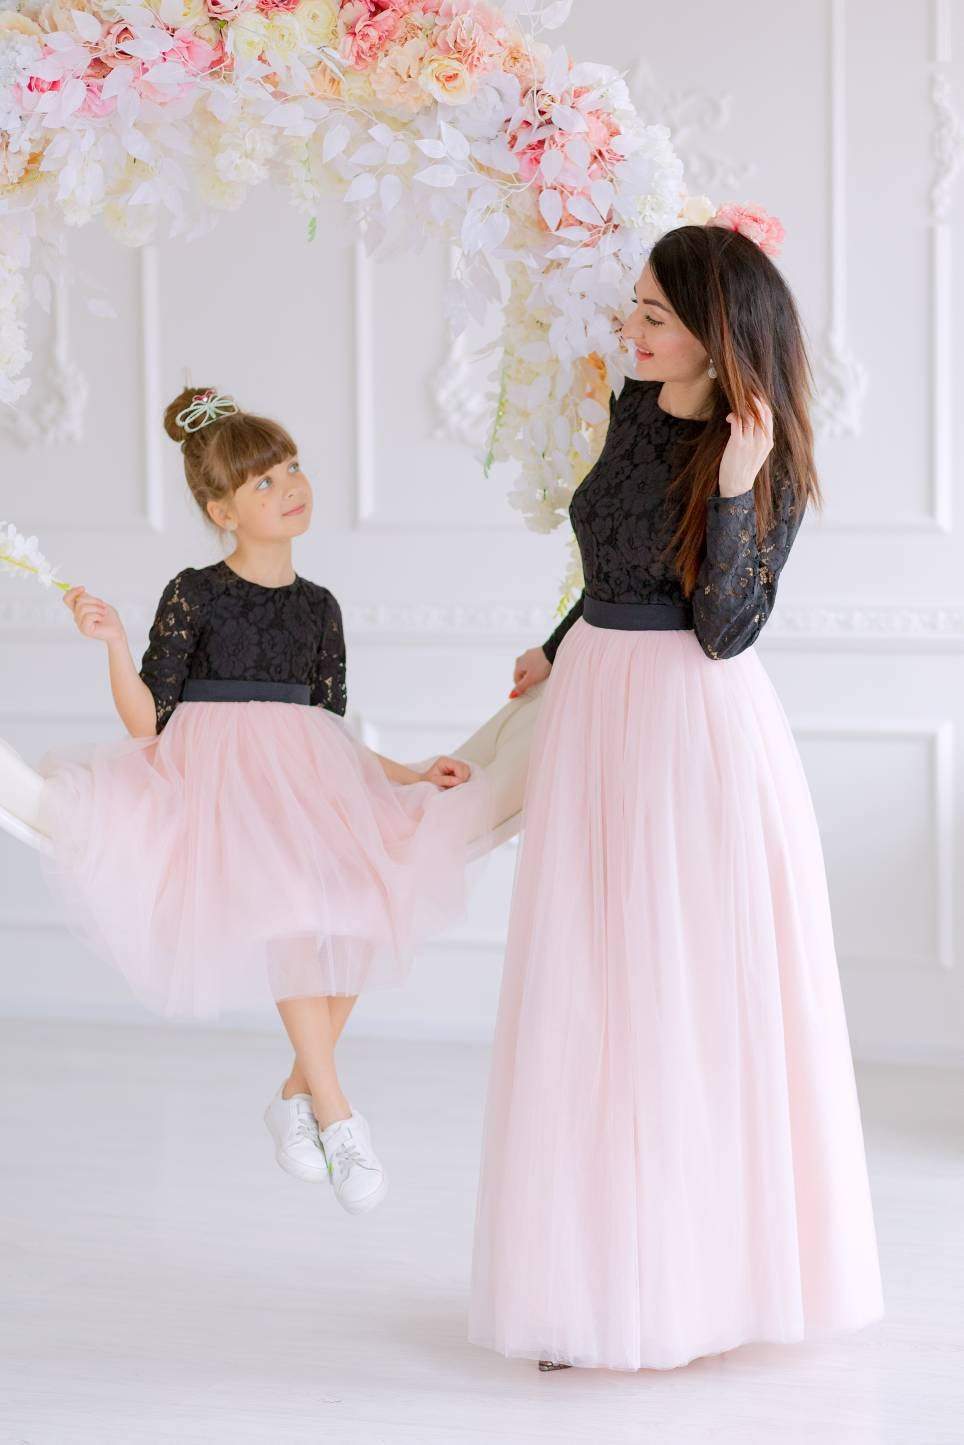 Sweet Sparkly Pink Sequin Beaded Dress For Girls Perfect For Prom,  Graduation, Birthdays And More! From Missdressprom, $82.04 | DHgate.Com